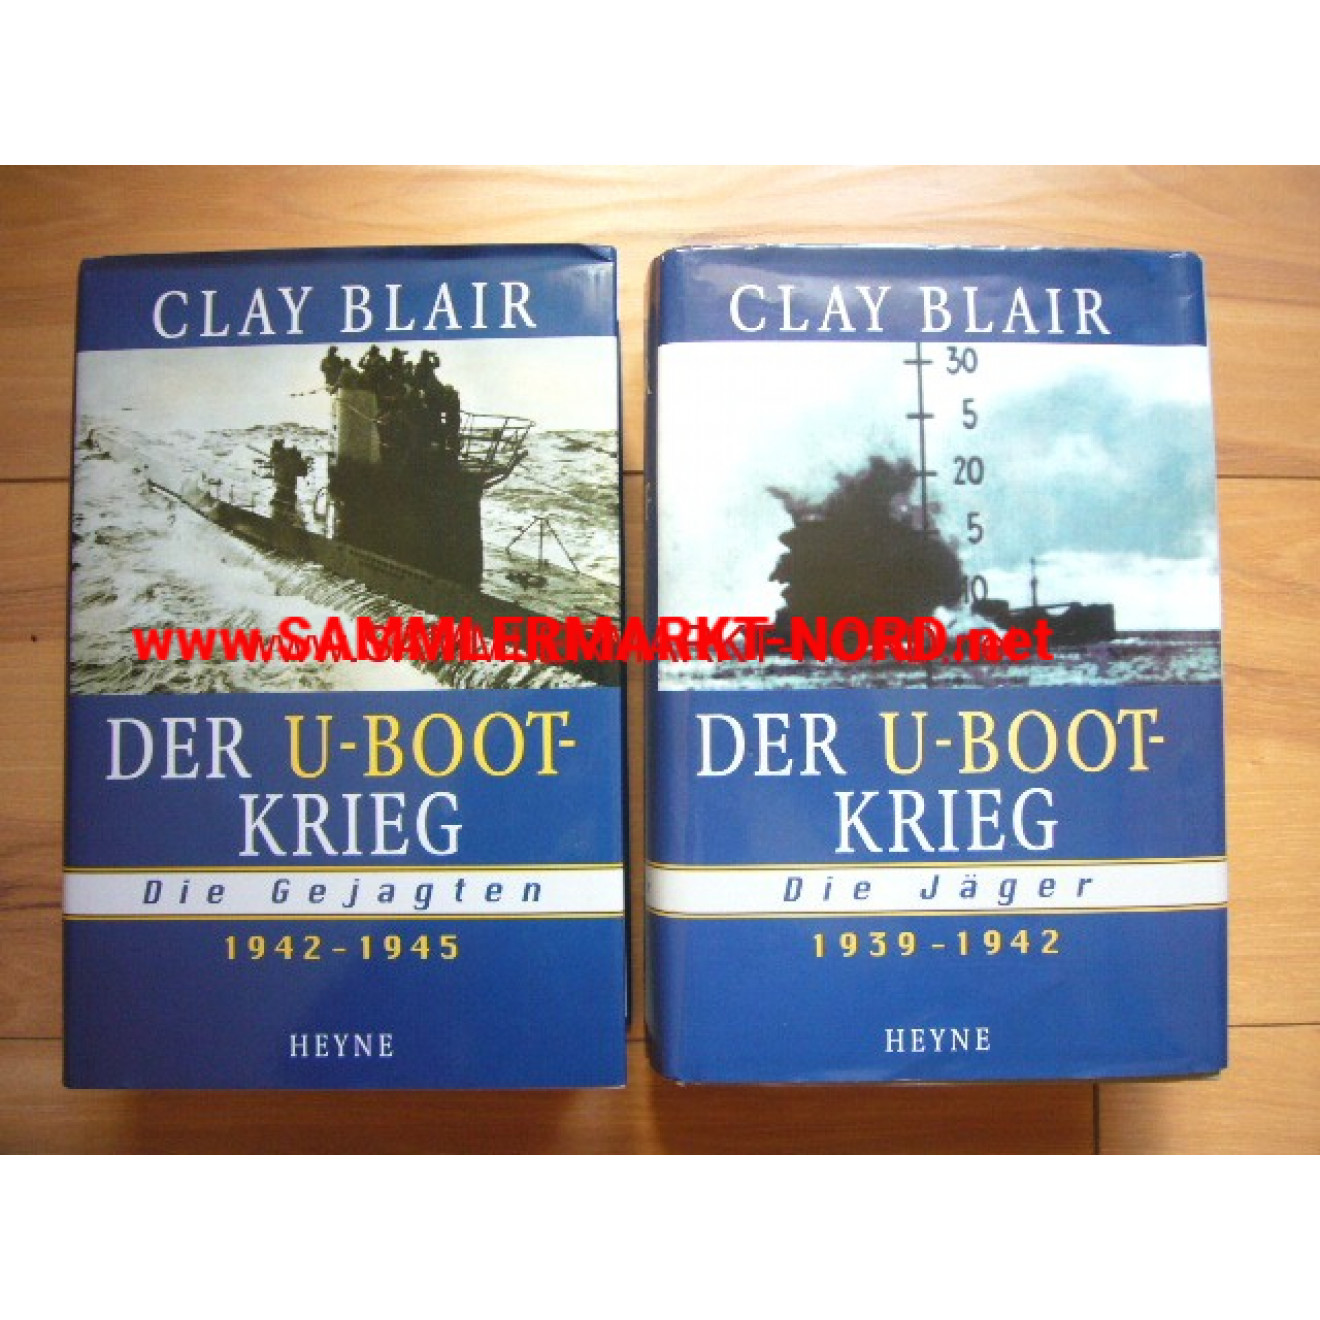 Two volumes of U-BOOT-KRIEG 1942-1945 - "Hunted" & "The Hunter"